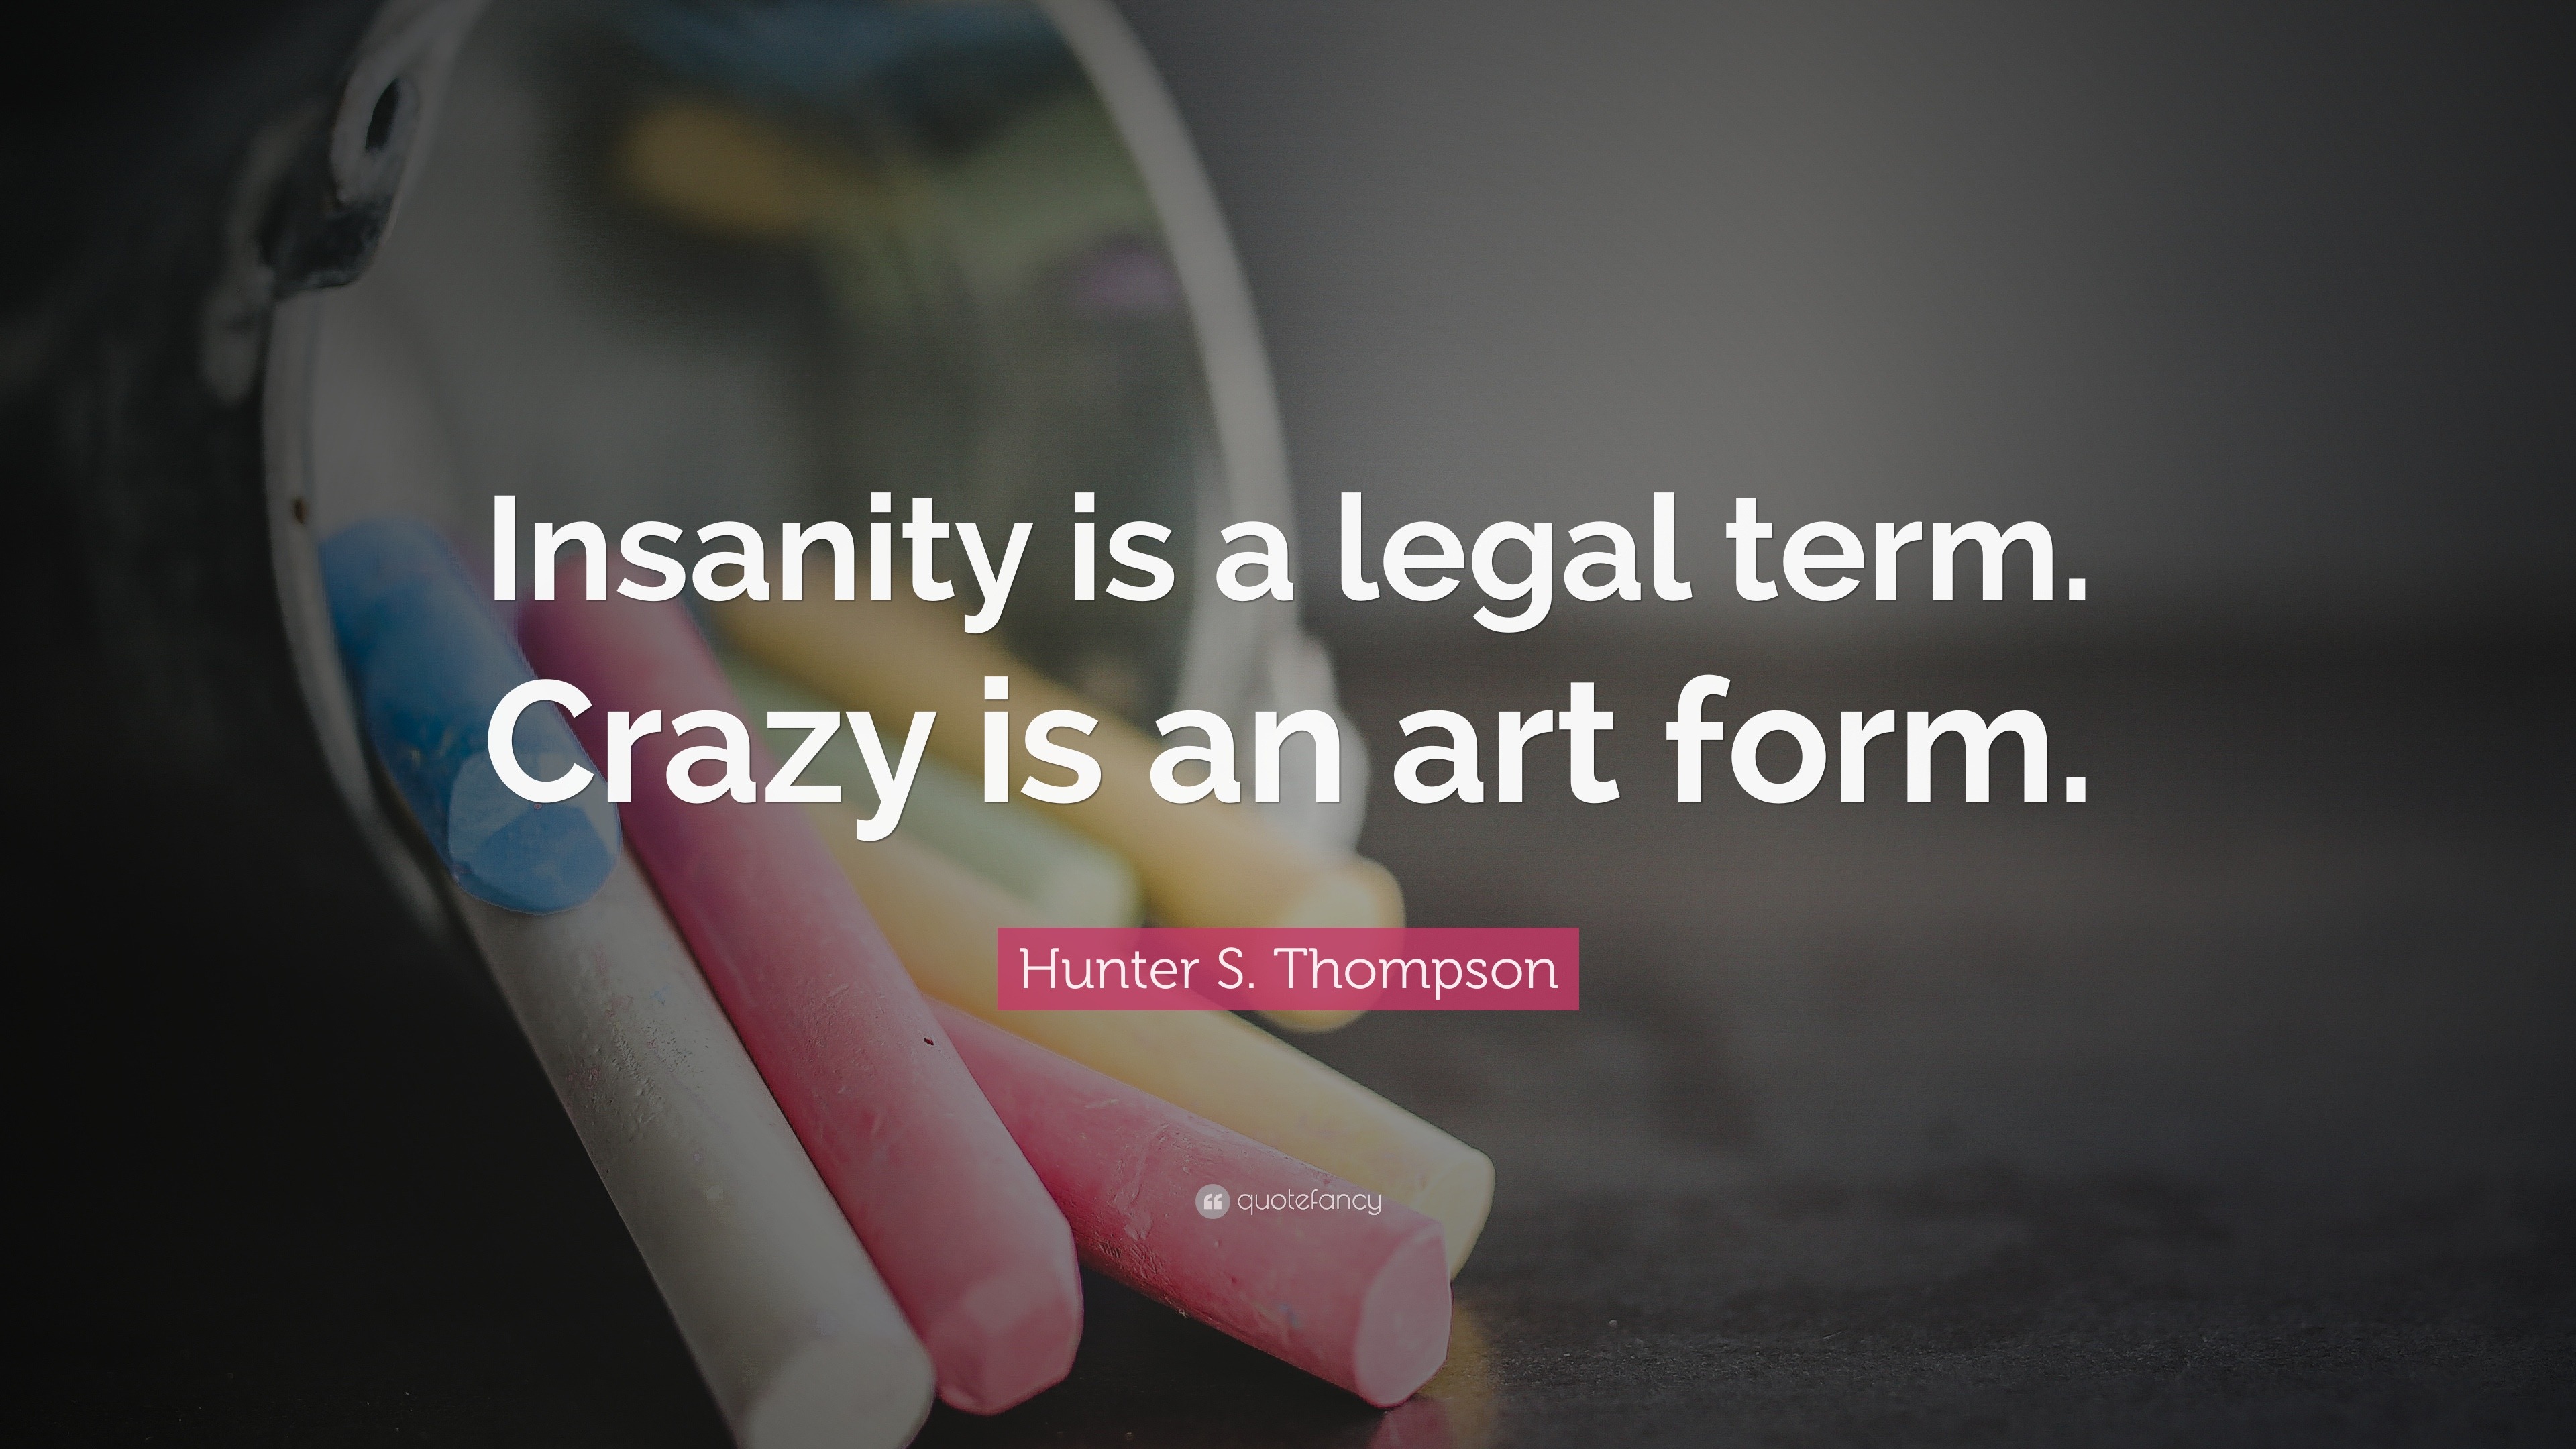 Hunter S. Thompson Quote: “Insanity is a legal term. Crazy is an